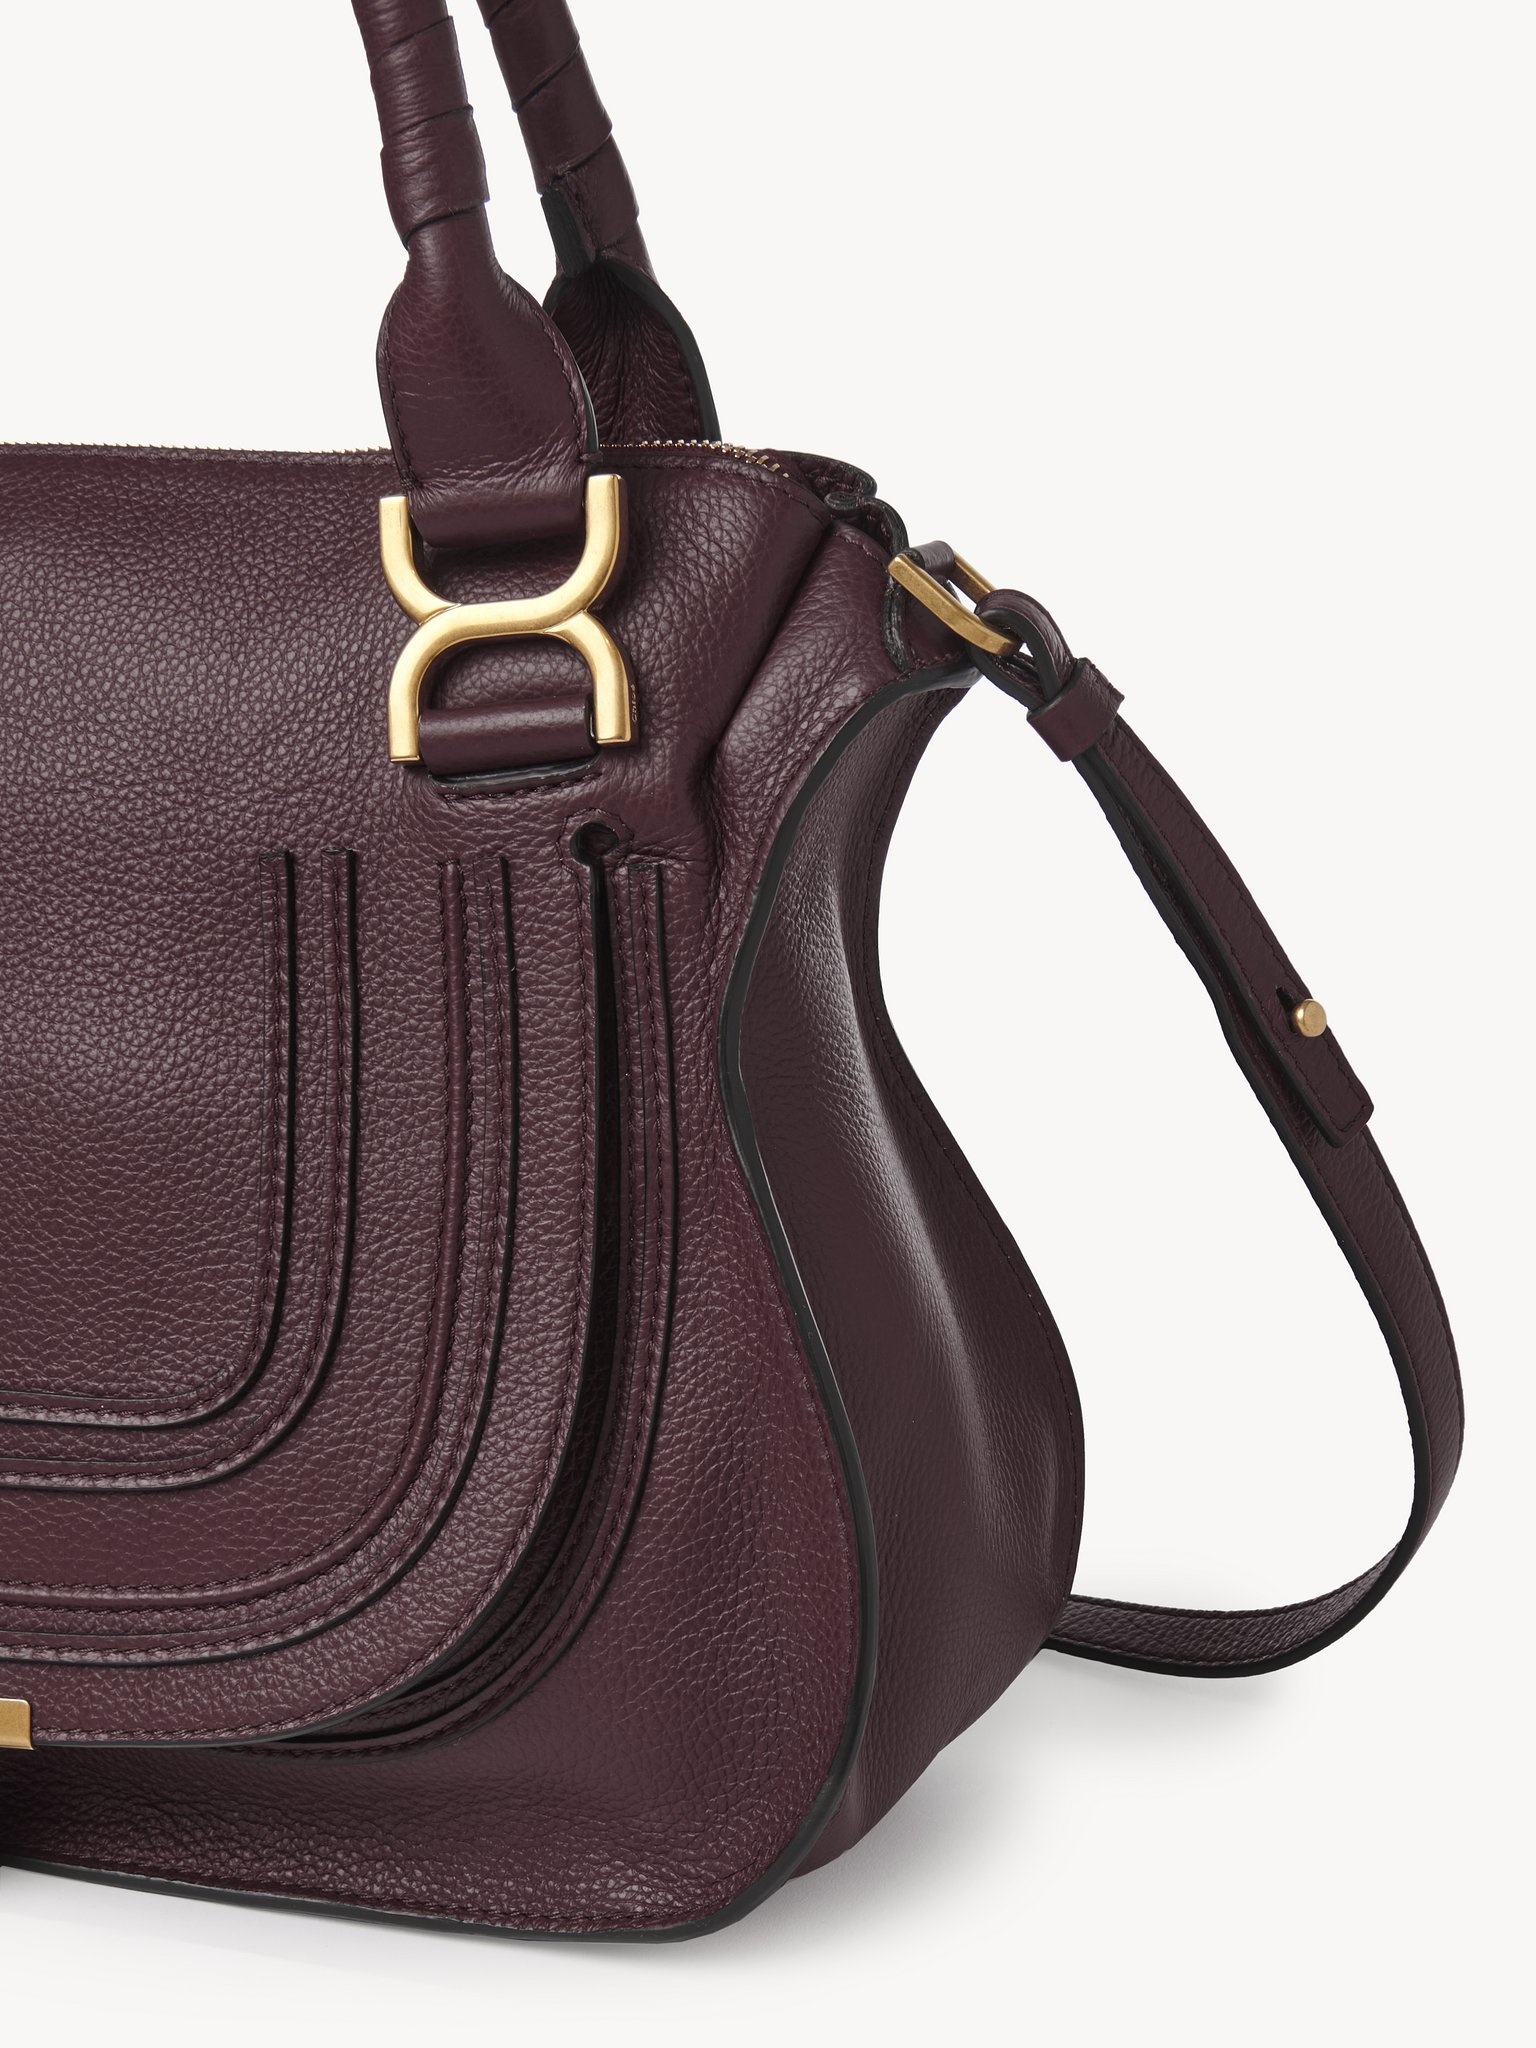 MARCIE BAG IN GRAINED LEATHER - 4